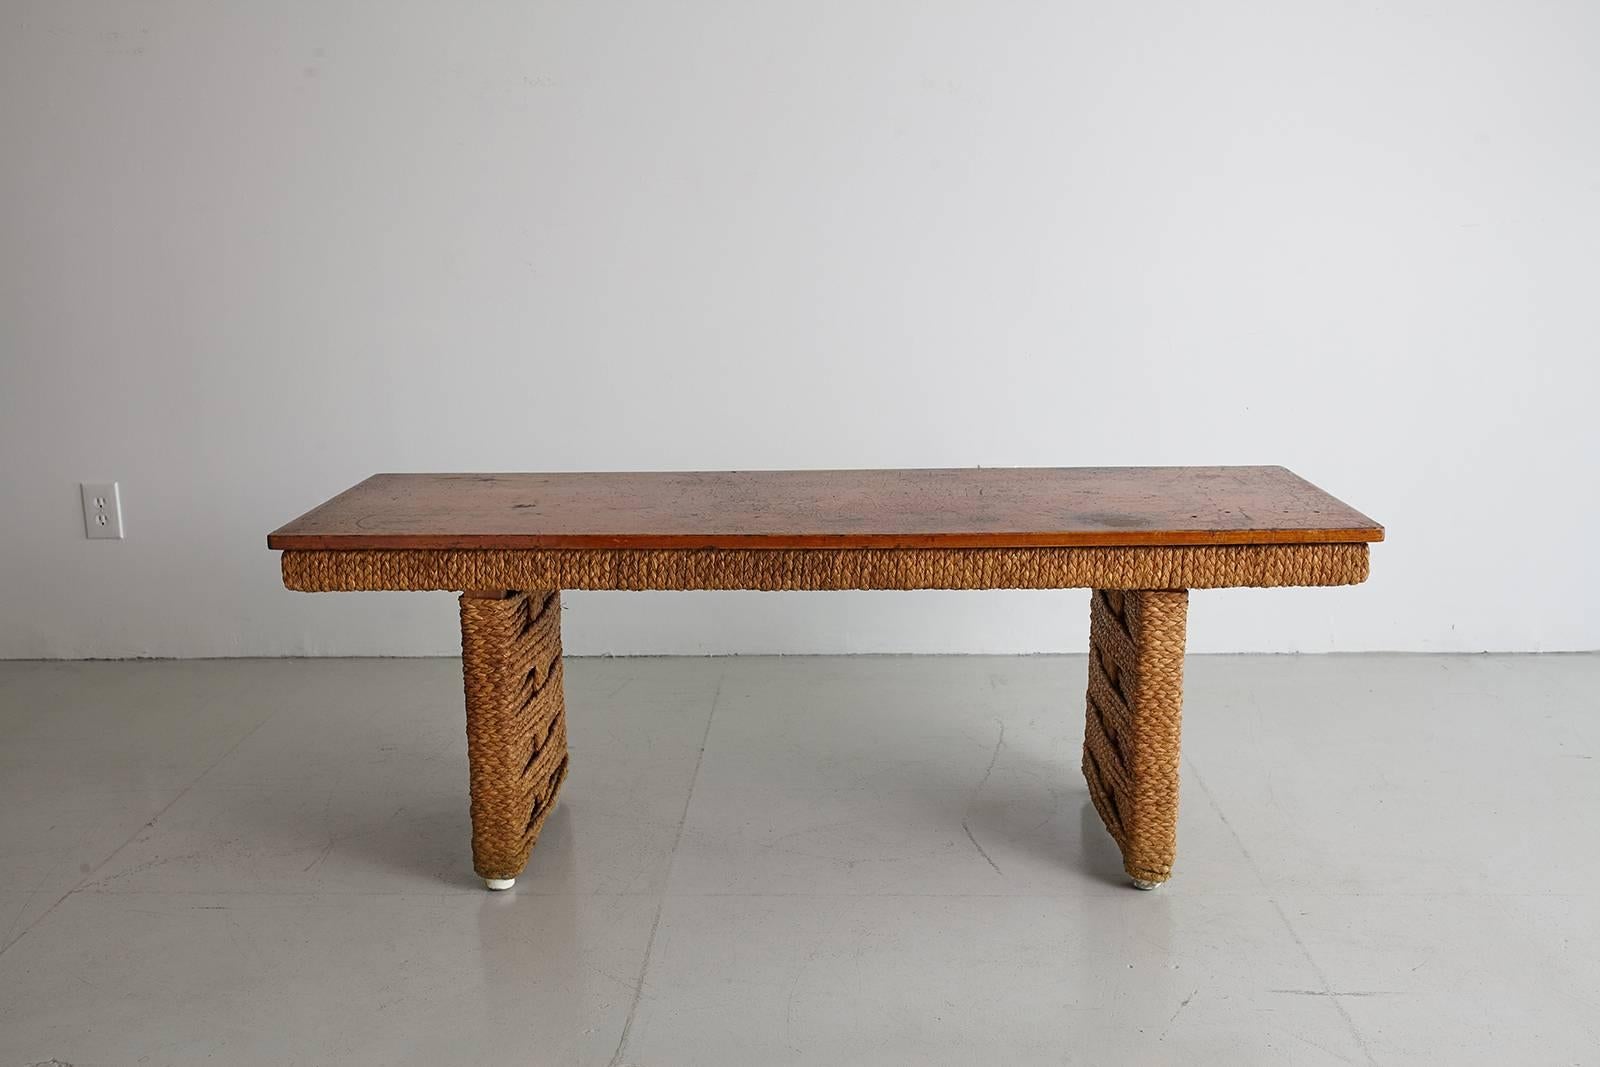 Rope Audoux Minet Table or Bench